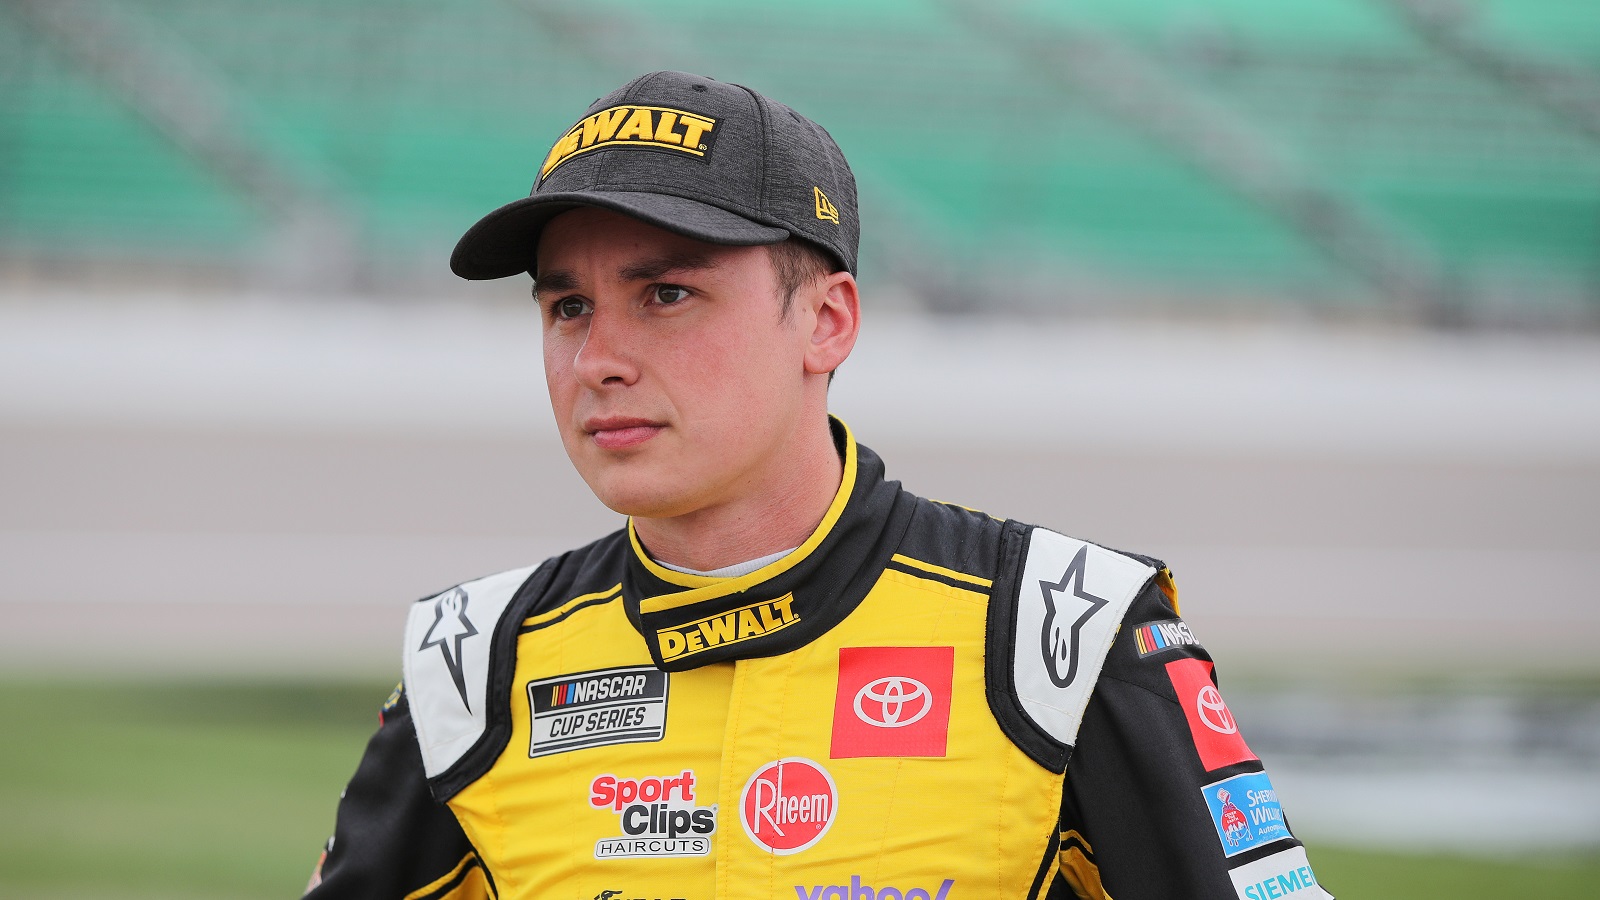 Christopher Bell looks on during qualifying for the NASCAR Cup Series Hollywood Casino 400 at Kansas Speedway on Sept. 10, 2022. | Meg Oliphant/Getty Images